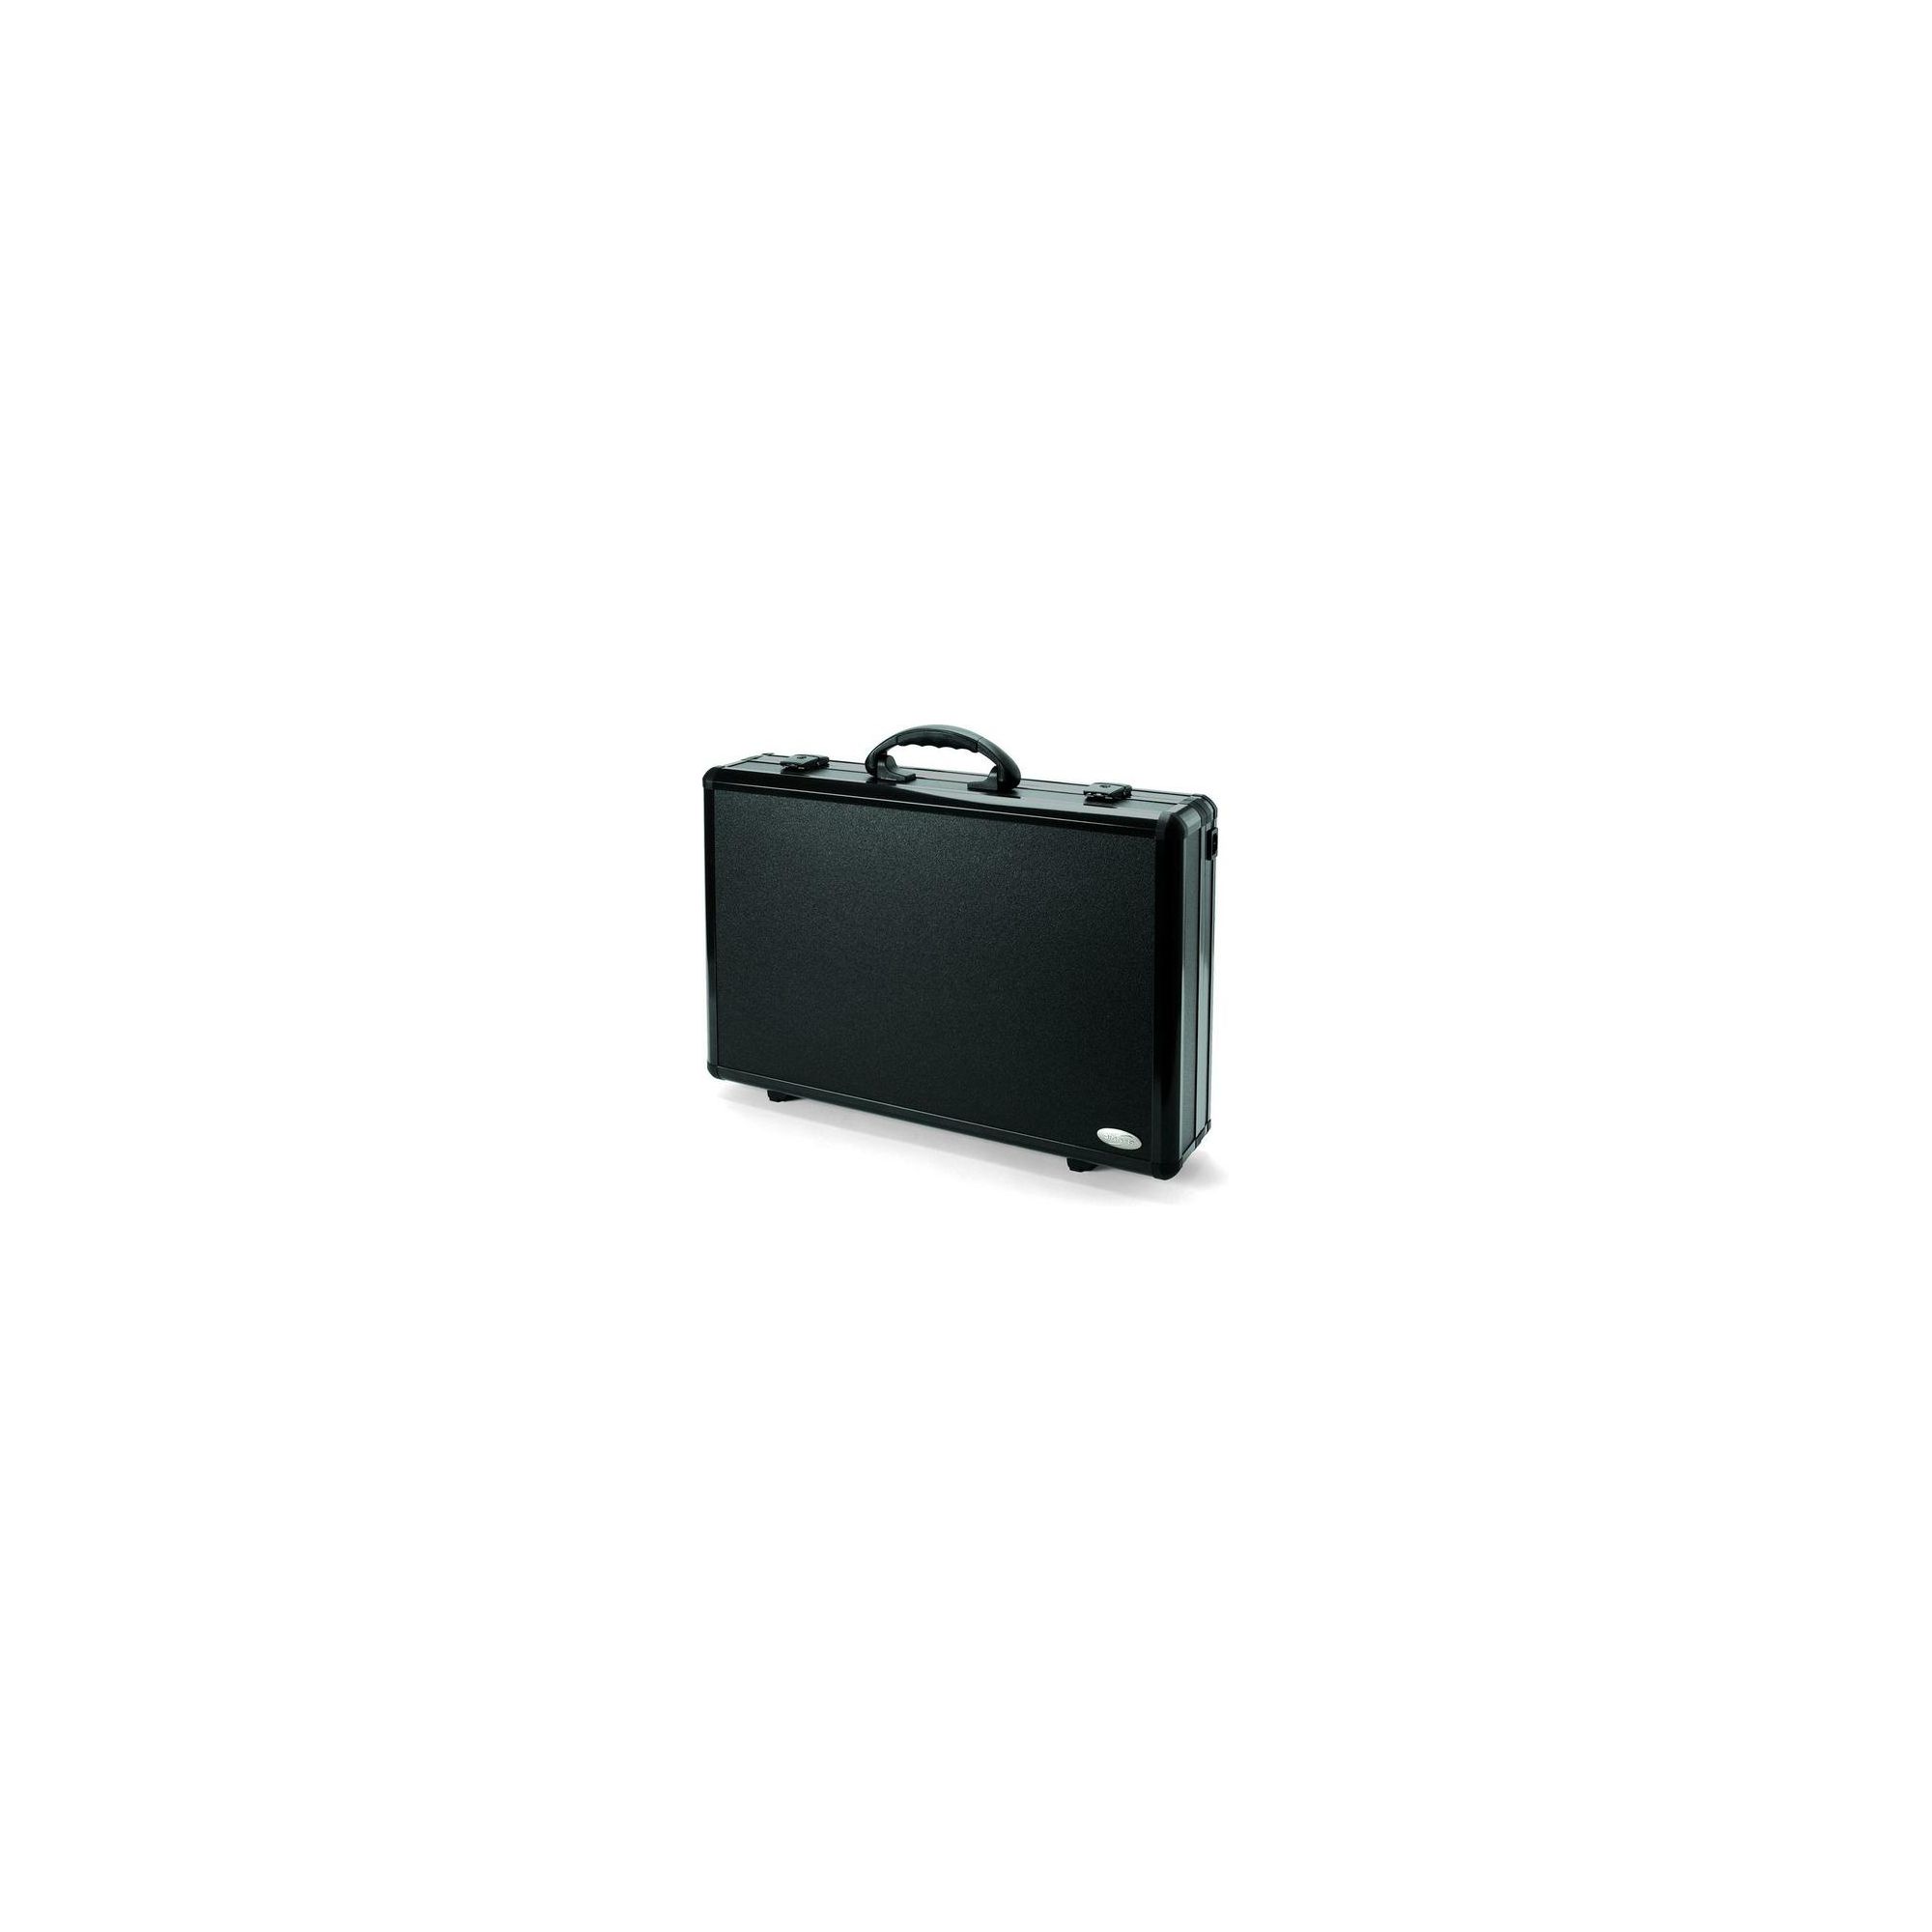 Dicota DataDesk Attache Case for Notebook and HP DJ 460/HP Officejet H470 Printer (Black) at Tescos Direct